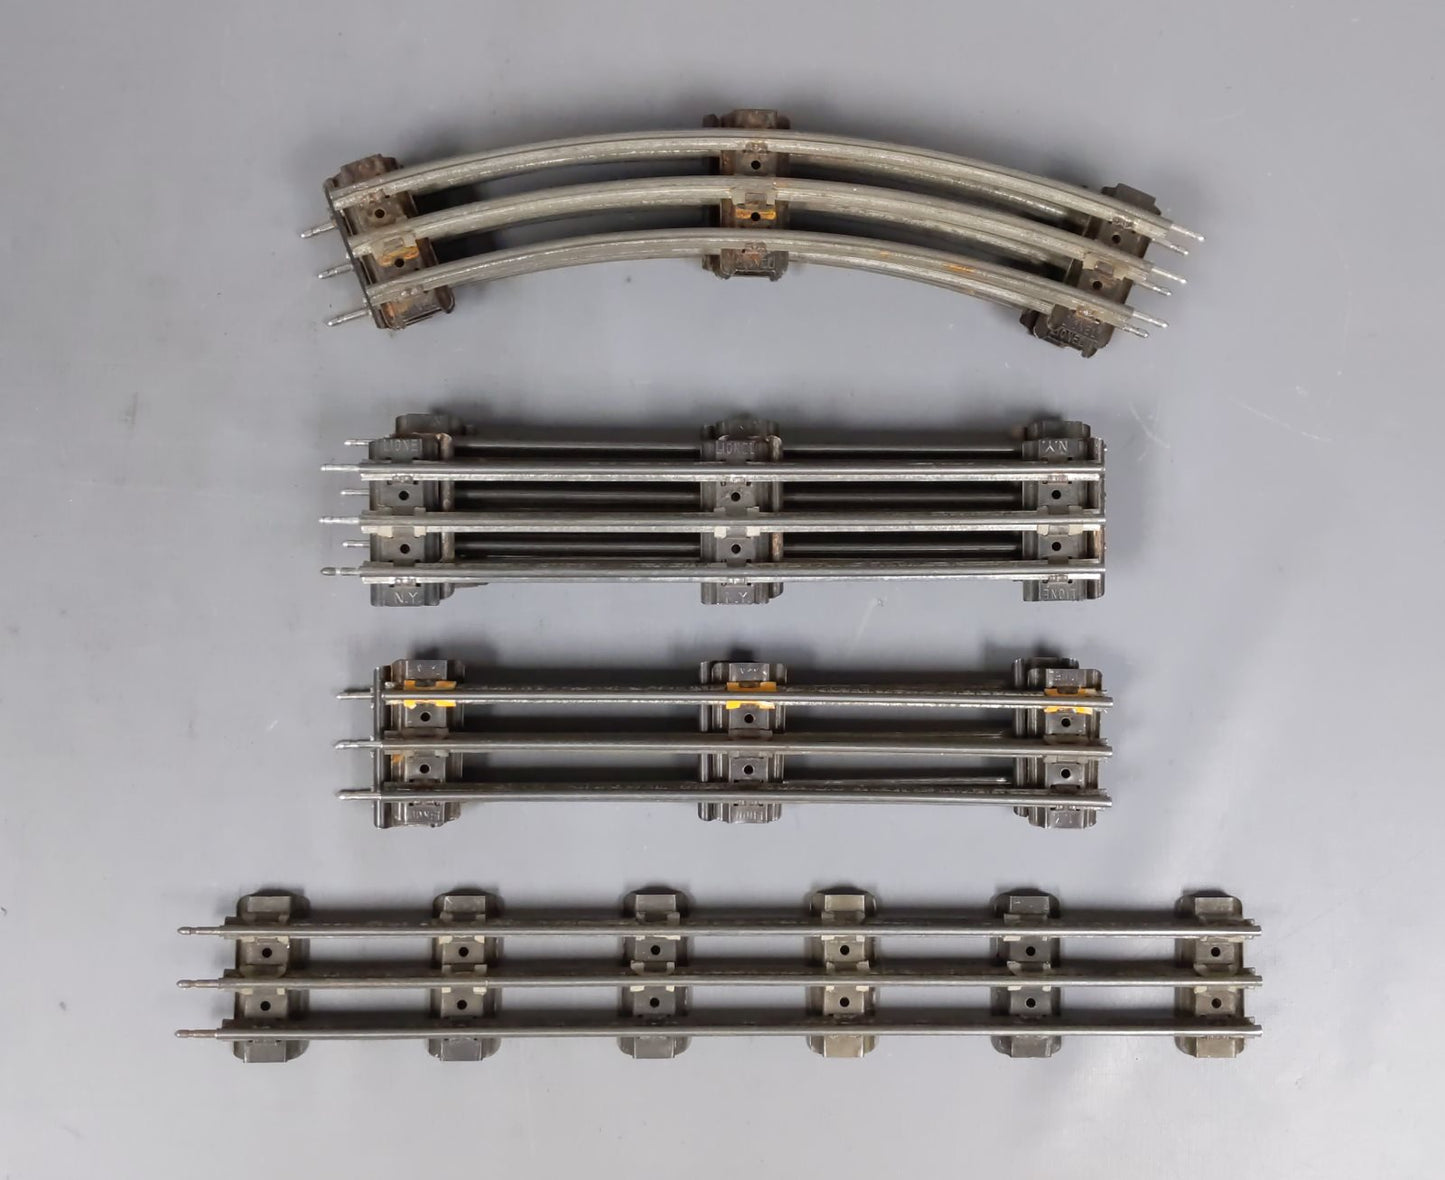 Lionel O Tubular Curved & Straight Track Sections [20+]